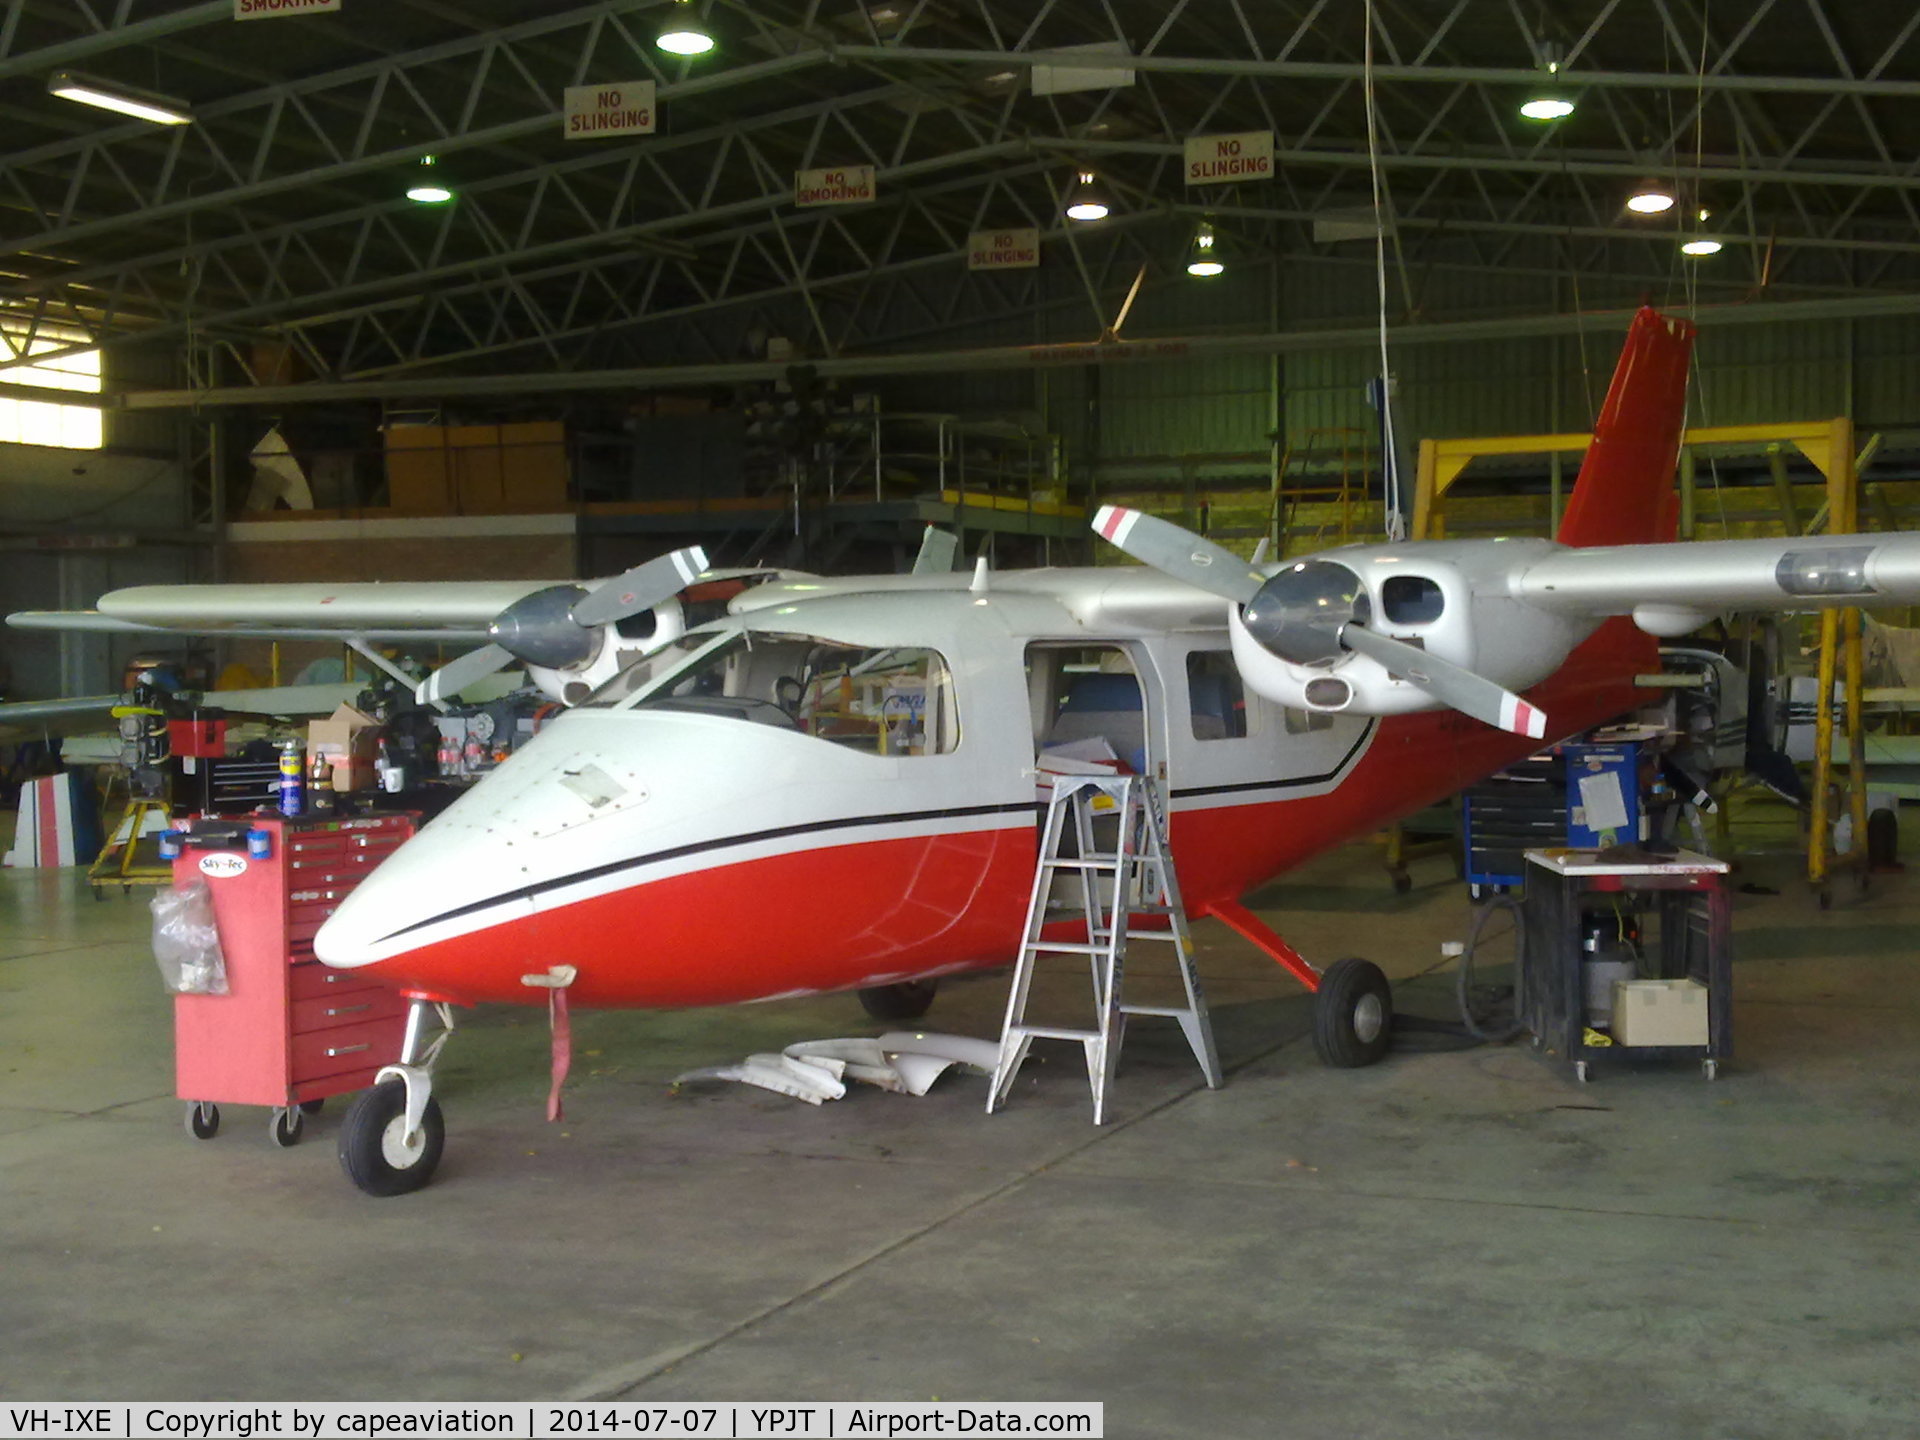 VH-IXE, 1979 Partenavia P-68B C/N 178, Starting the Annual Inspection - hope there are no nasties found.